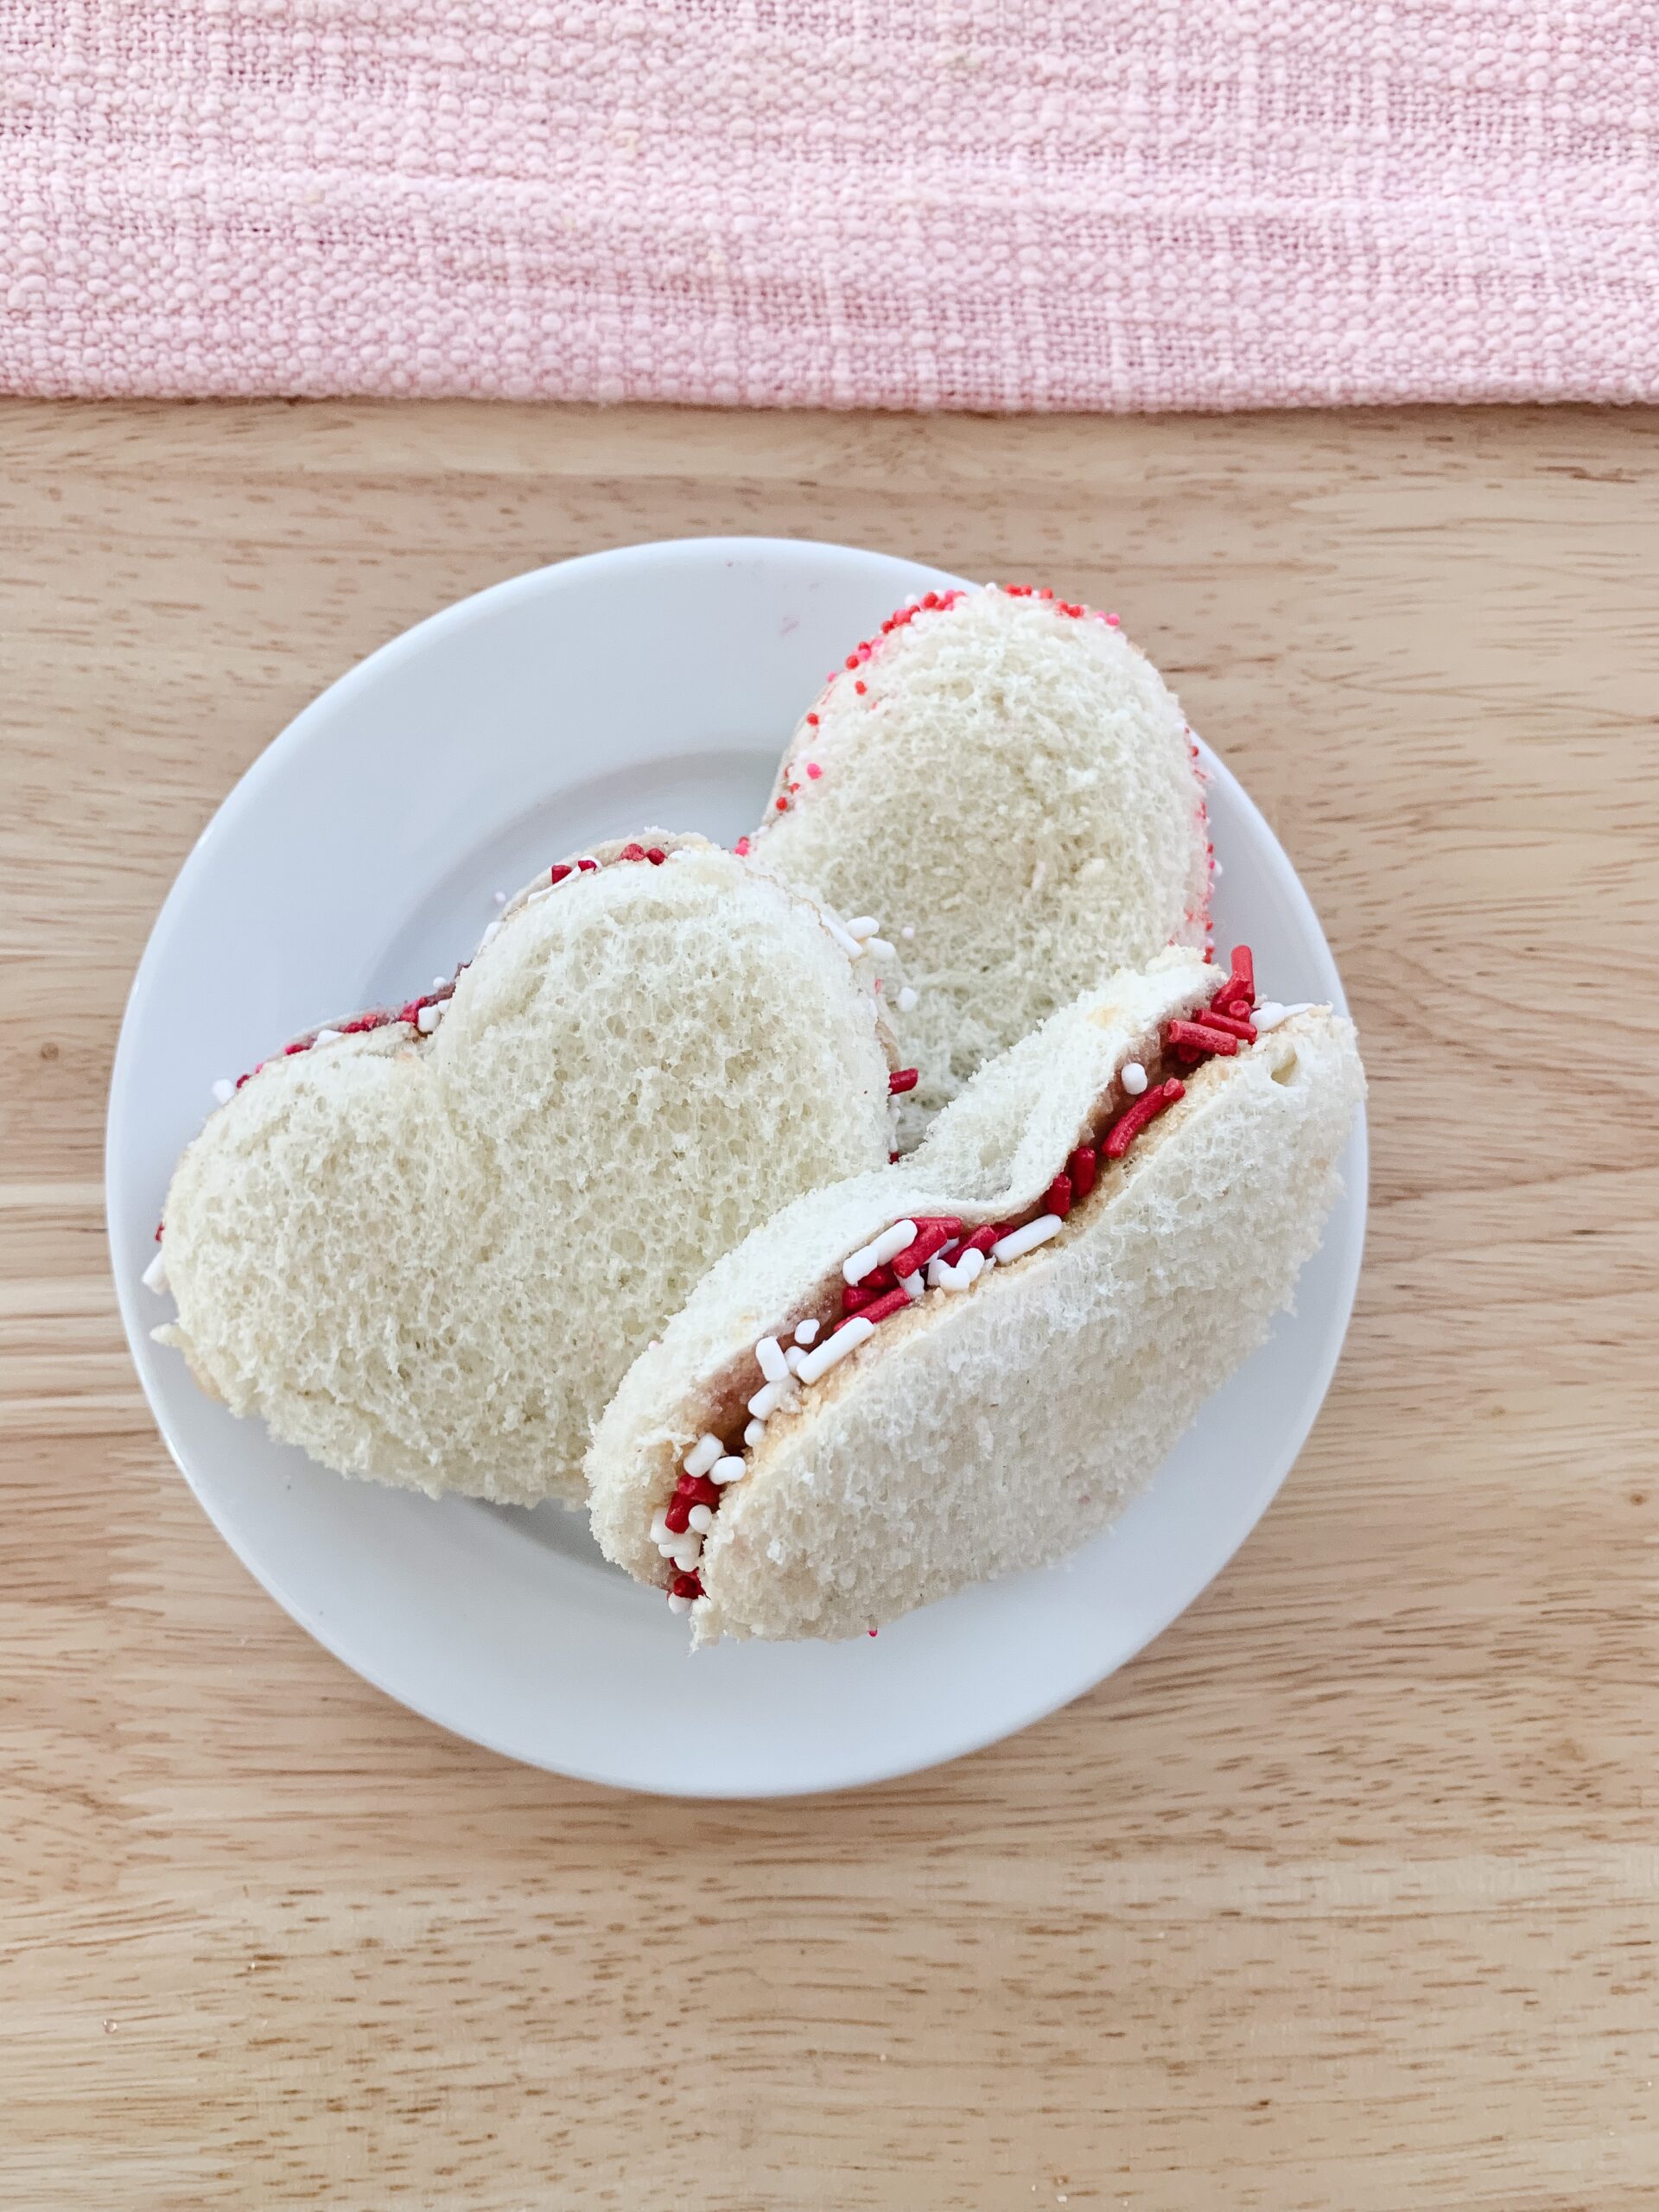 Valentine's Day heart shaped peanut butter and jelly sandwiches